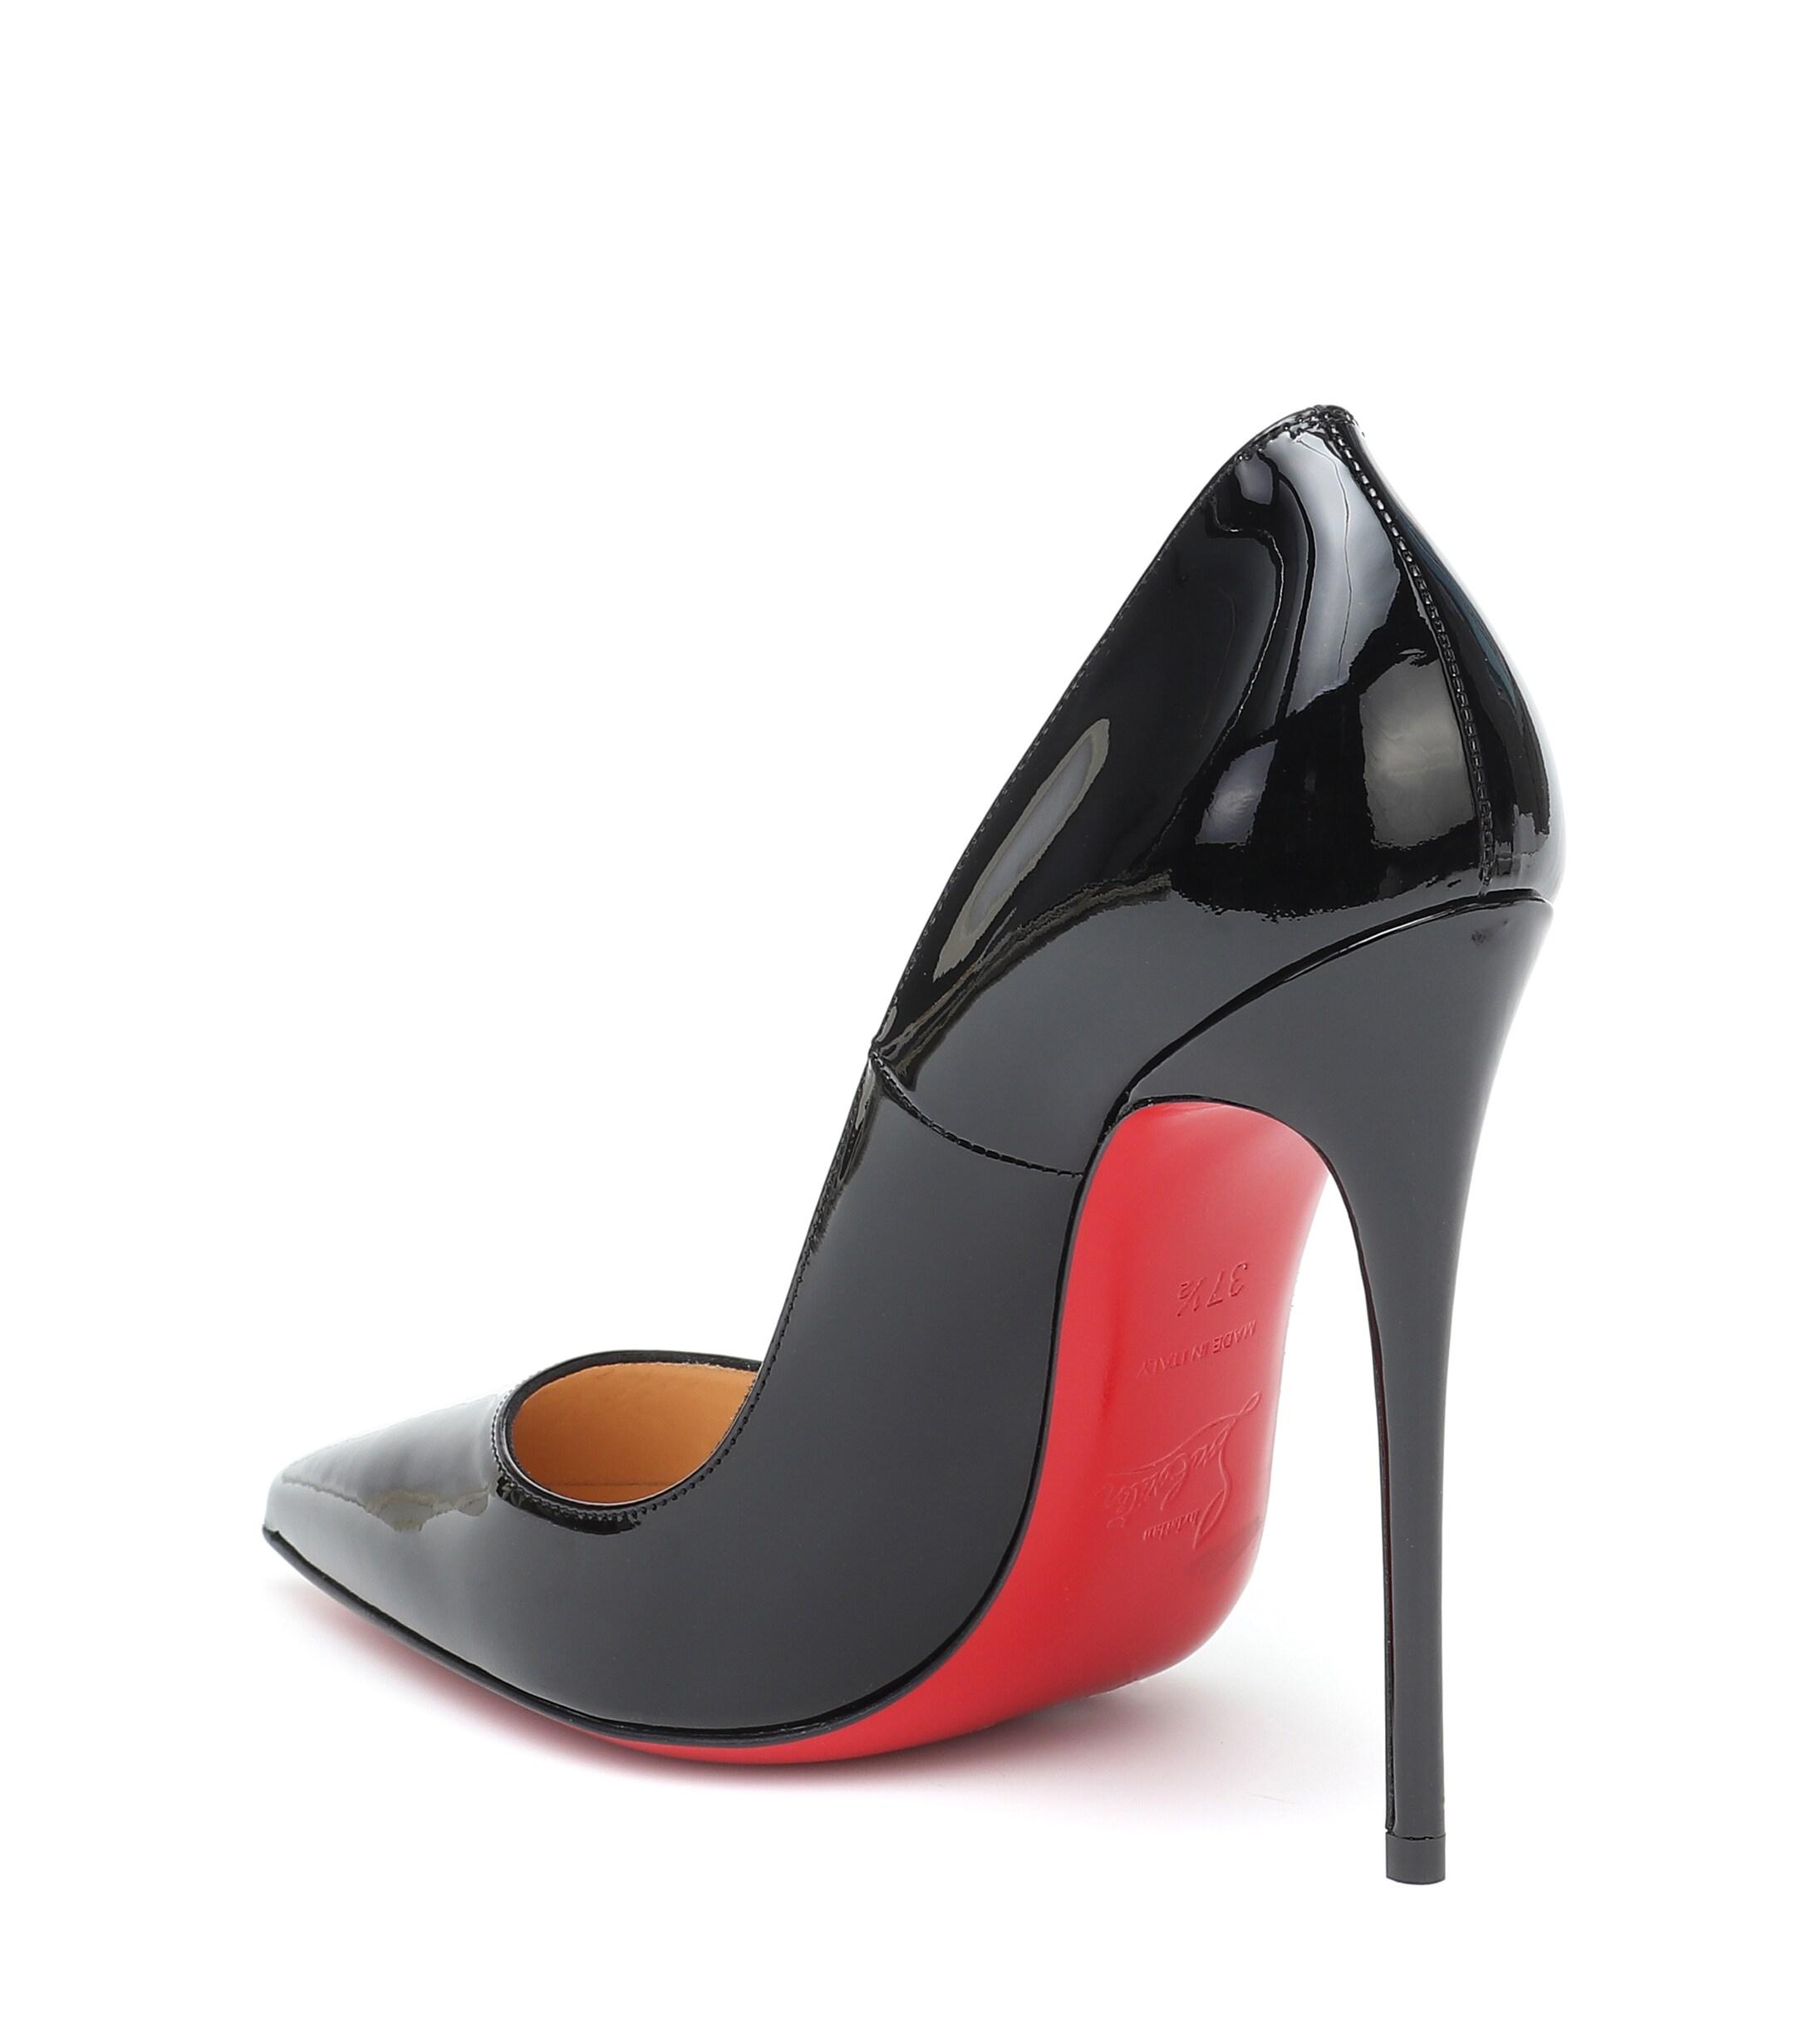 Christian Leather So Kate Patent Red Sole Pumps in Black Save 83% Lyst